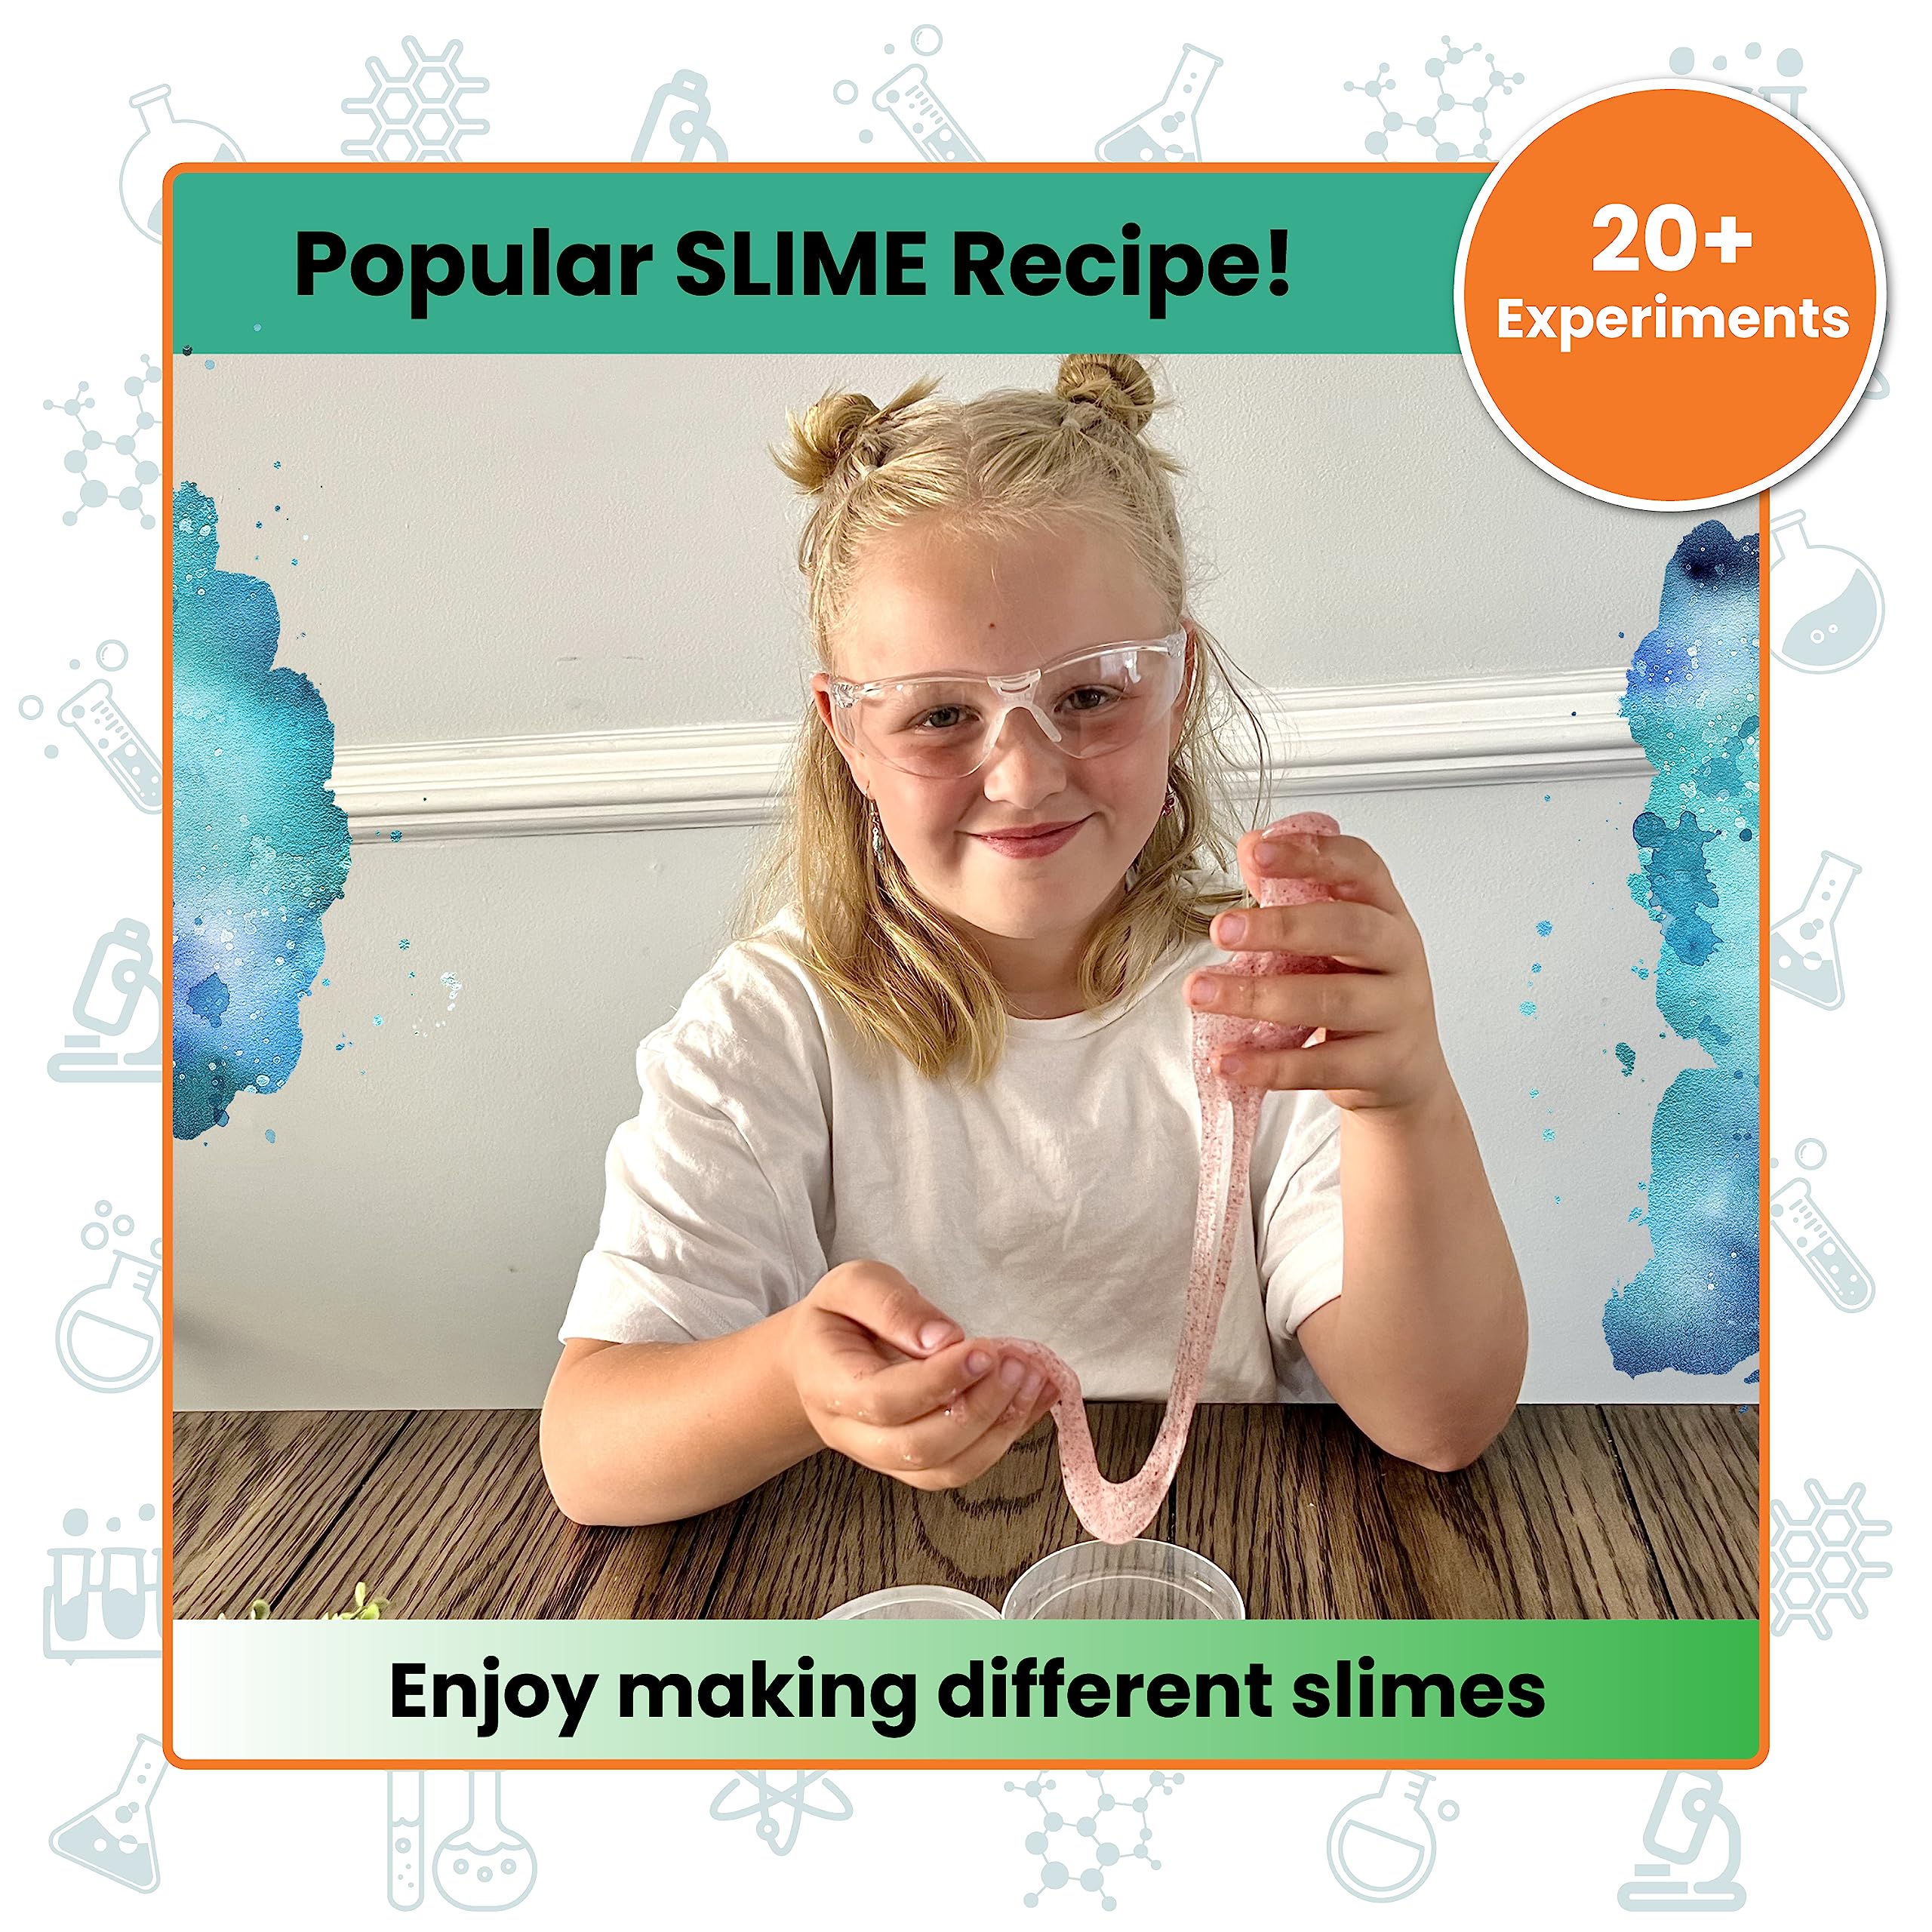 Butterfly Edufields Science Experiment & 20+ Chemistry Lab Kit for kids Ages 4-5-7-8-10 | STEM Toy gift & Fun Educational Projects for boys and girls ages 4+ yrs